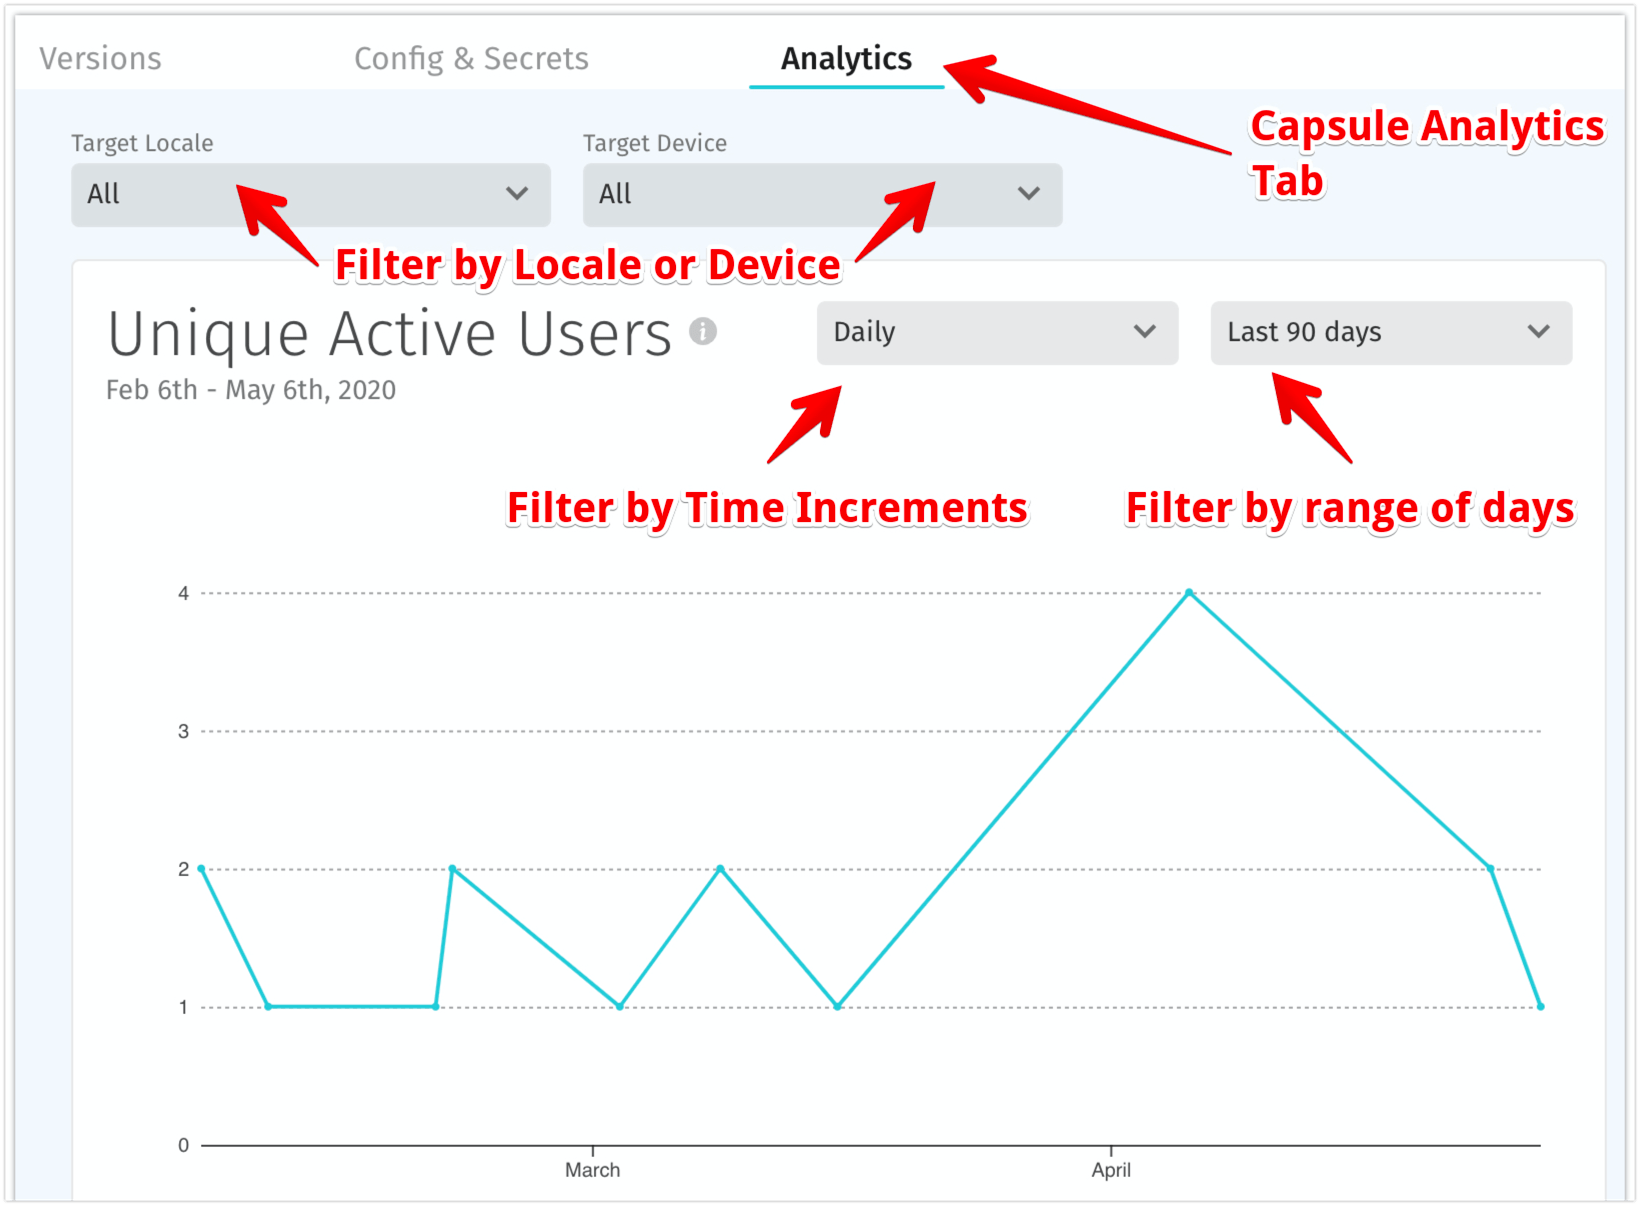 Capsule Analytics page infographic, pointing to various parts. The top-most arrow points to the Analytics tab, saying "Capsule Analytics tab". Another arrow points to the Target Locale drop-down, while another arrow points to the Target Device drop-down. These arrows say "Filter by Locale or Device". Another arrow points to the Time drop-down, saying "Filter by Time Increments". The last arrow points to the time range drop-down, saying "Filter by range of days".